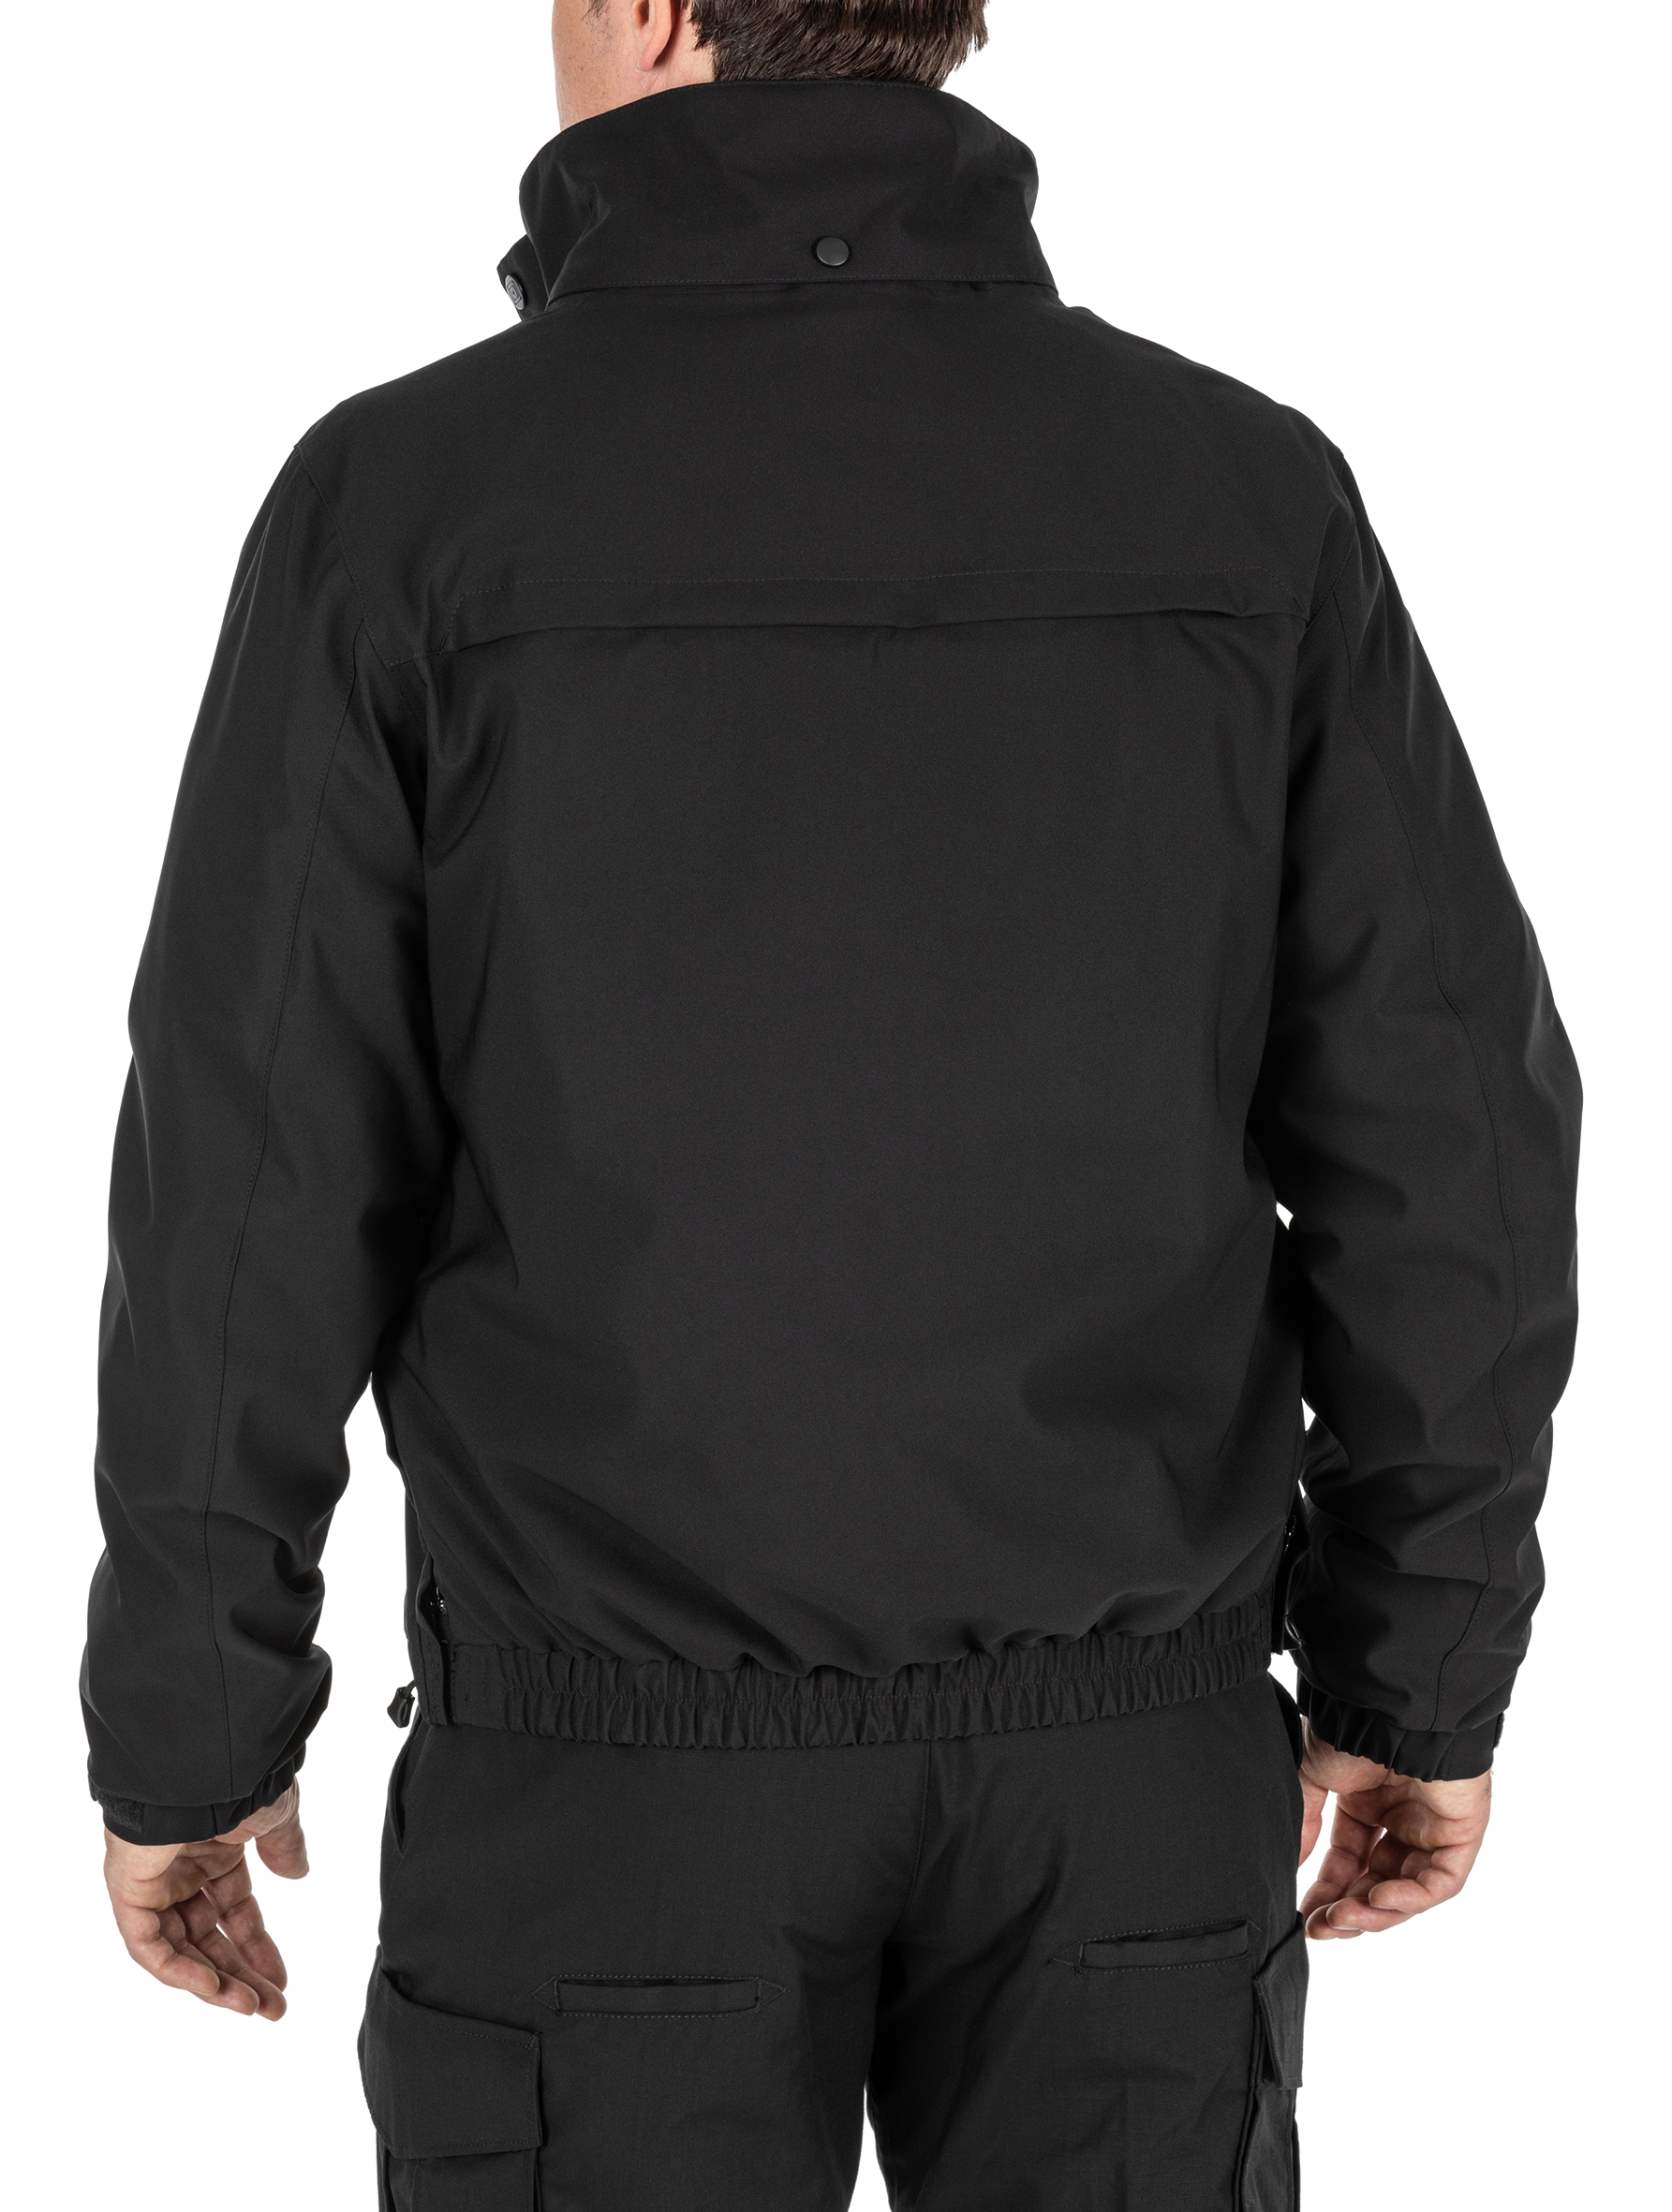 5.11 Tactical 5-in-1 Jacket 2.0 | Recon Company